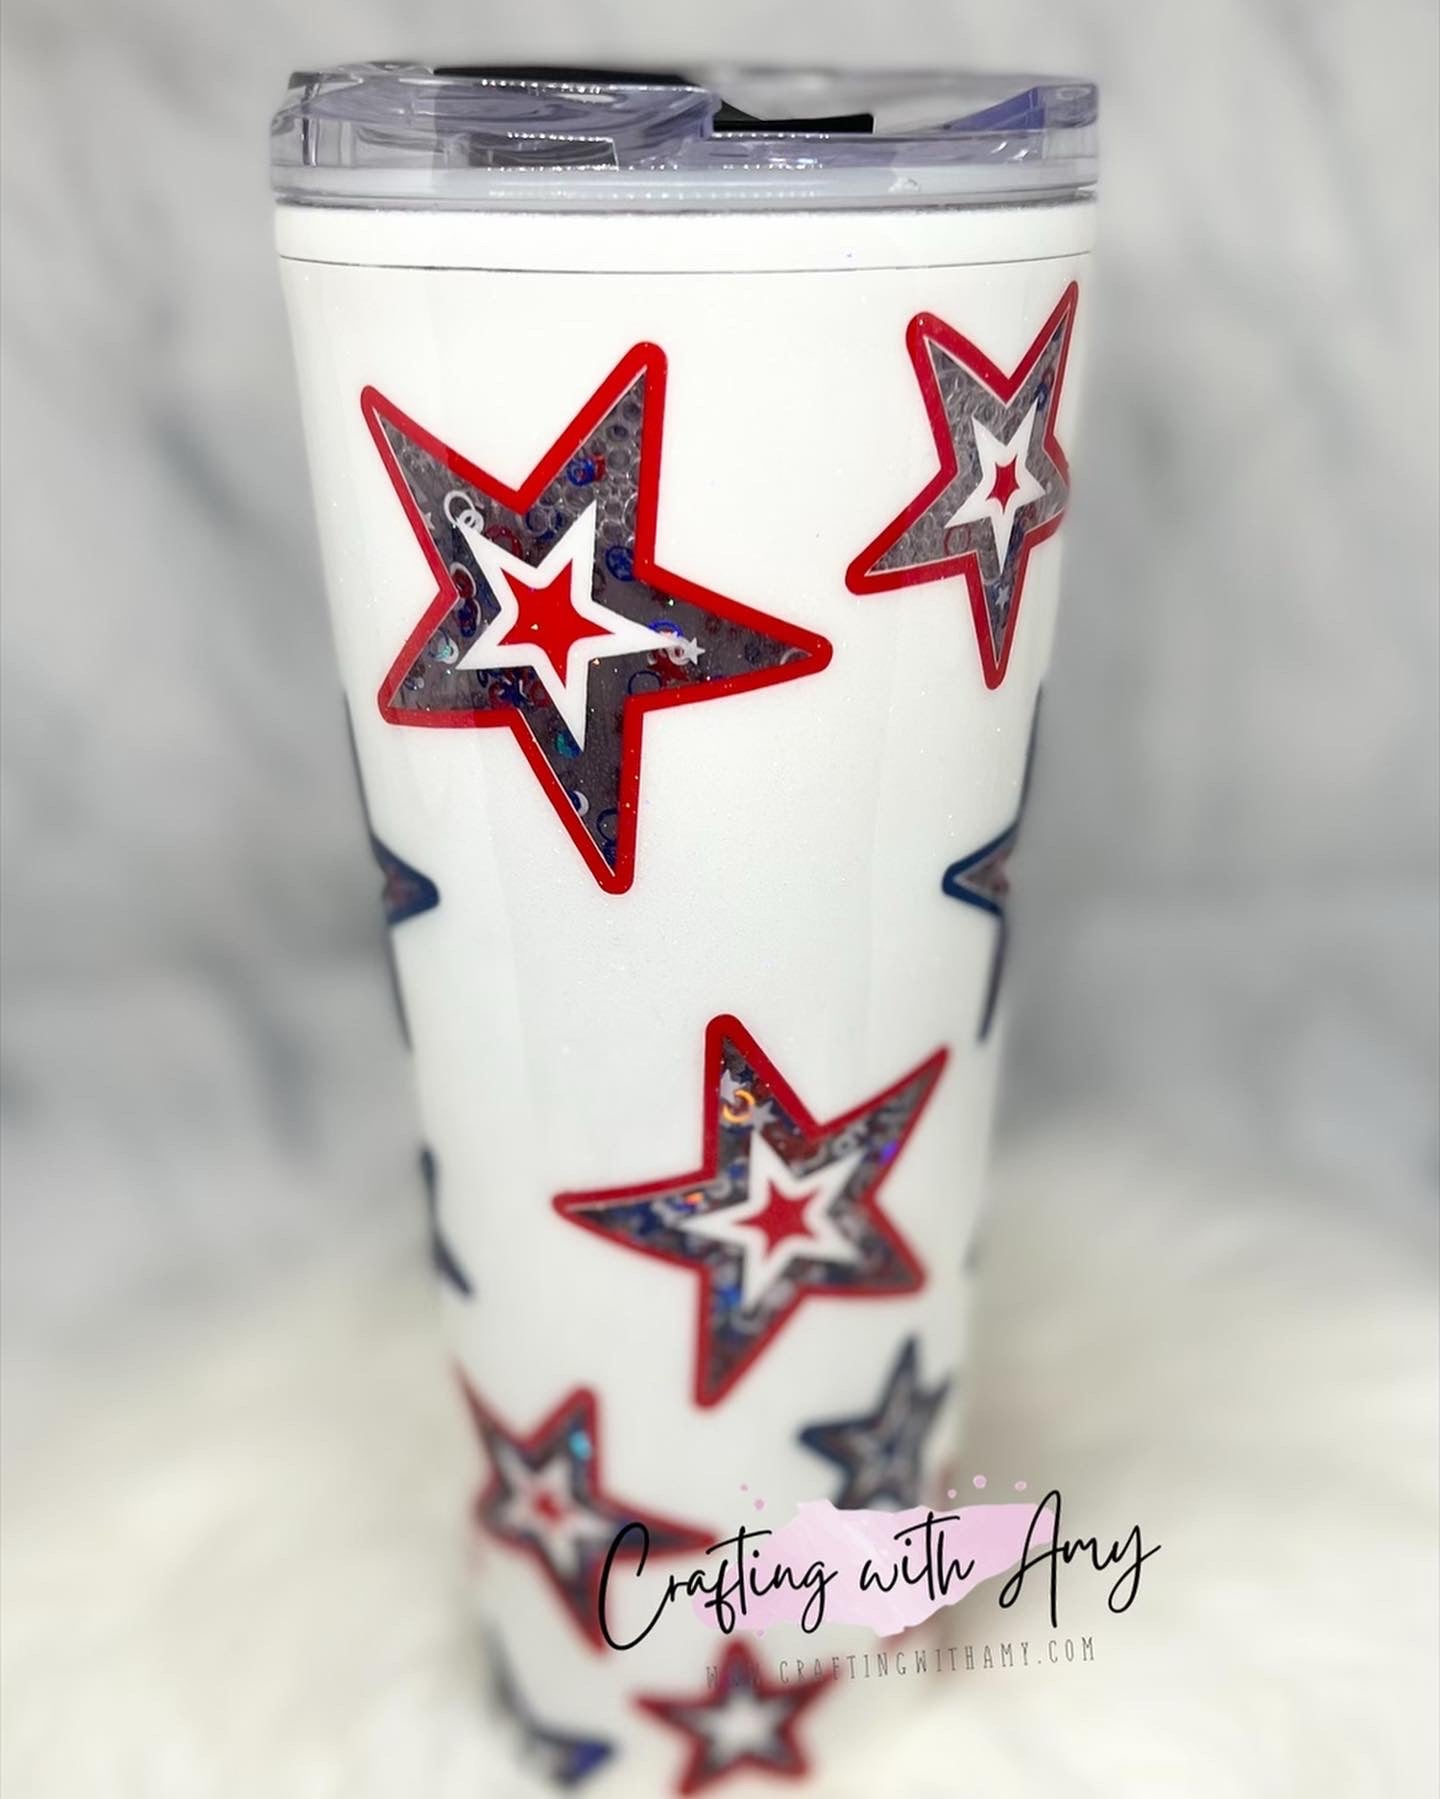 Red White and Boozy - CraftingwithAmy